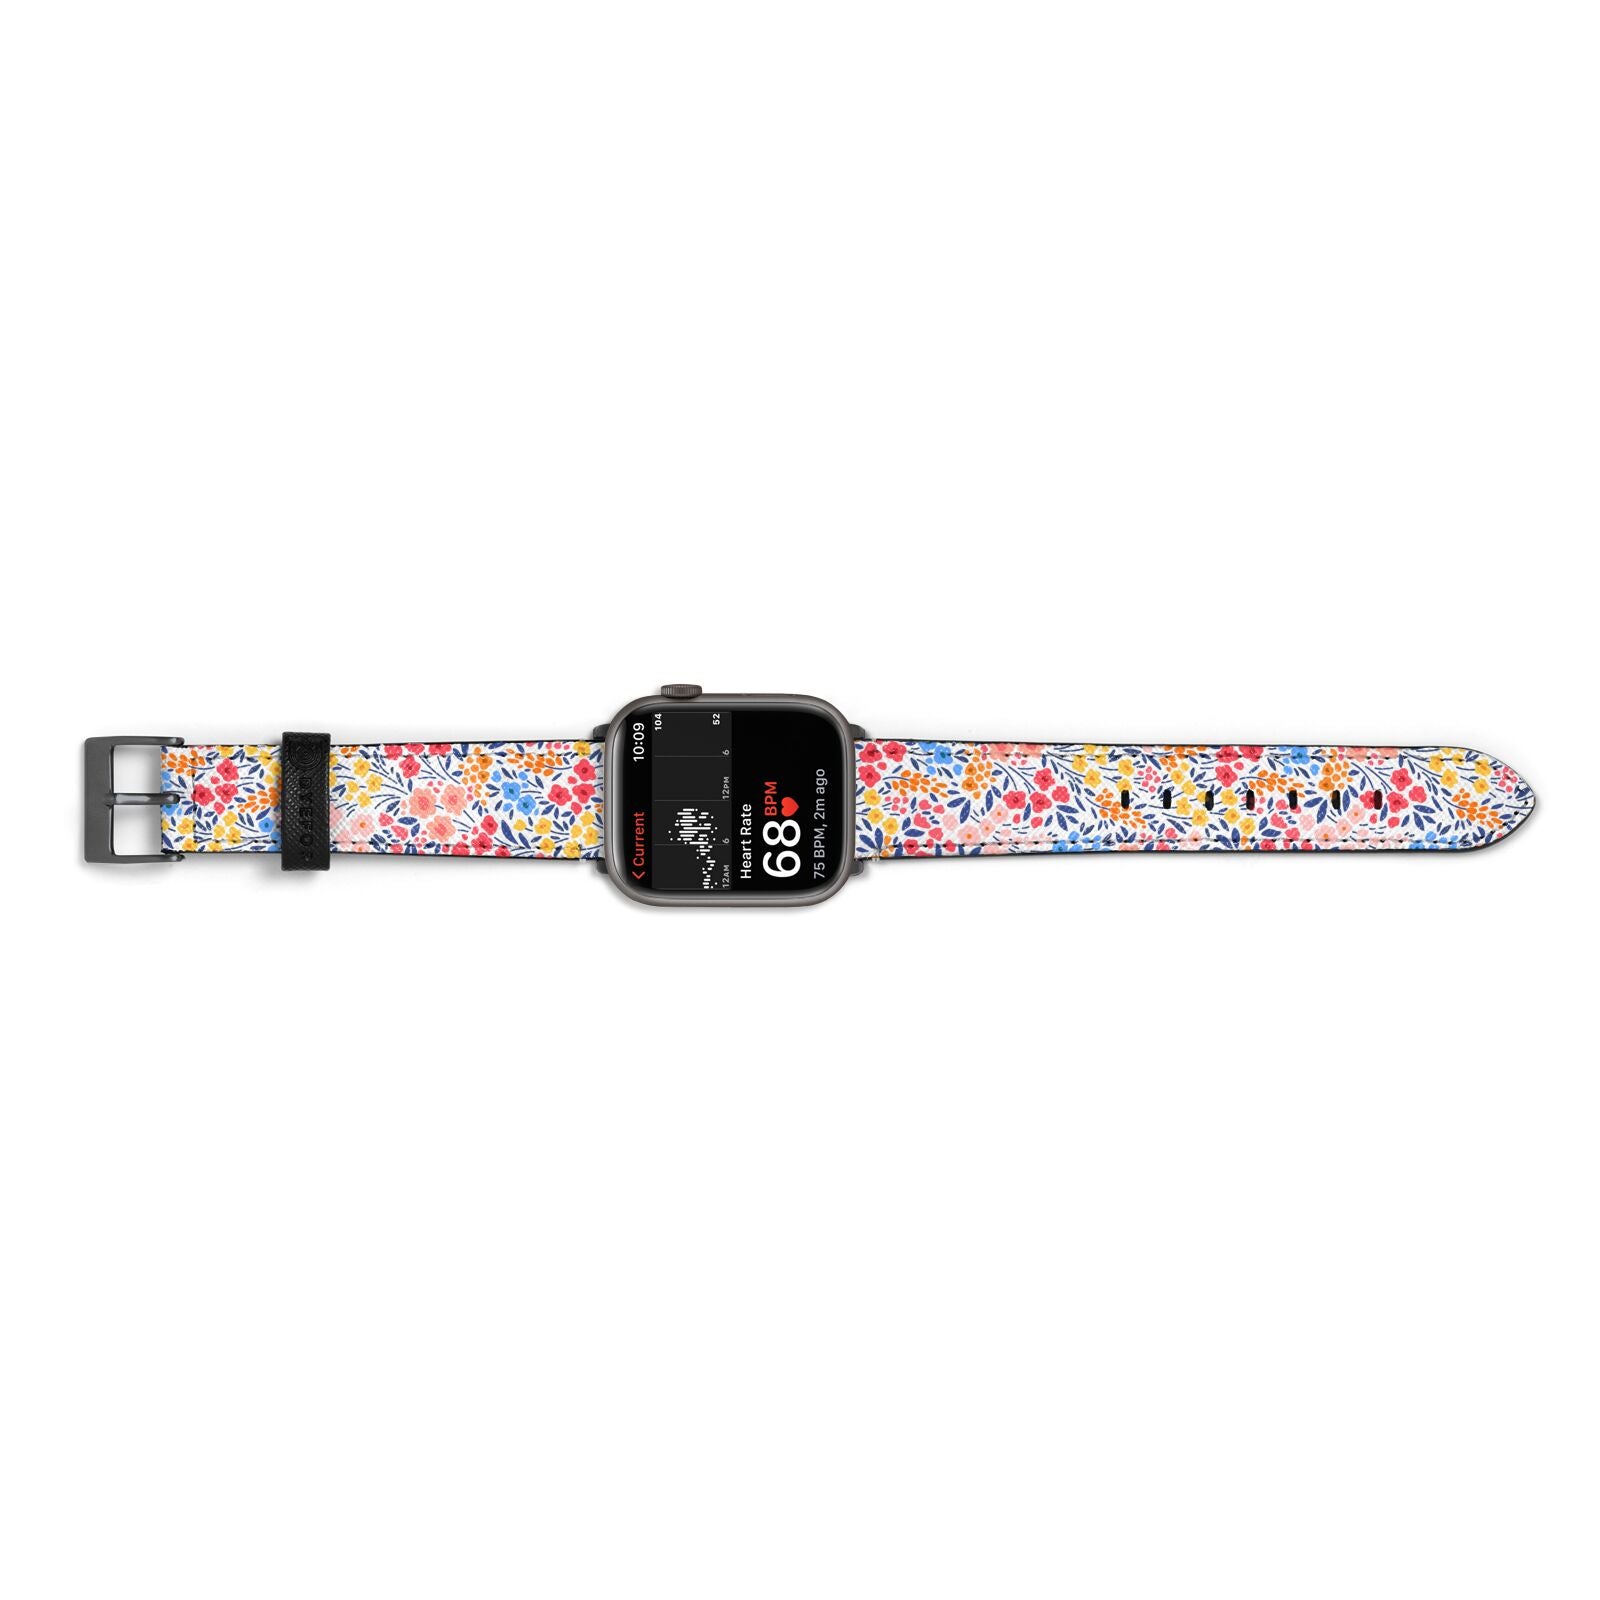 Small Flowers Apple Watch Strap Size 38mm Landscape Image Space Grey Hardware